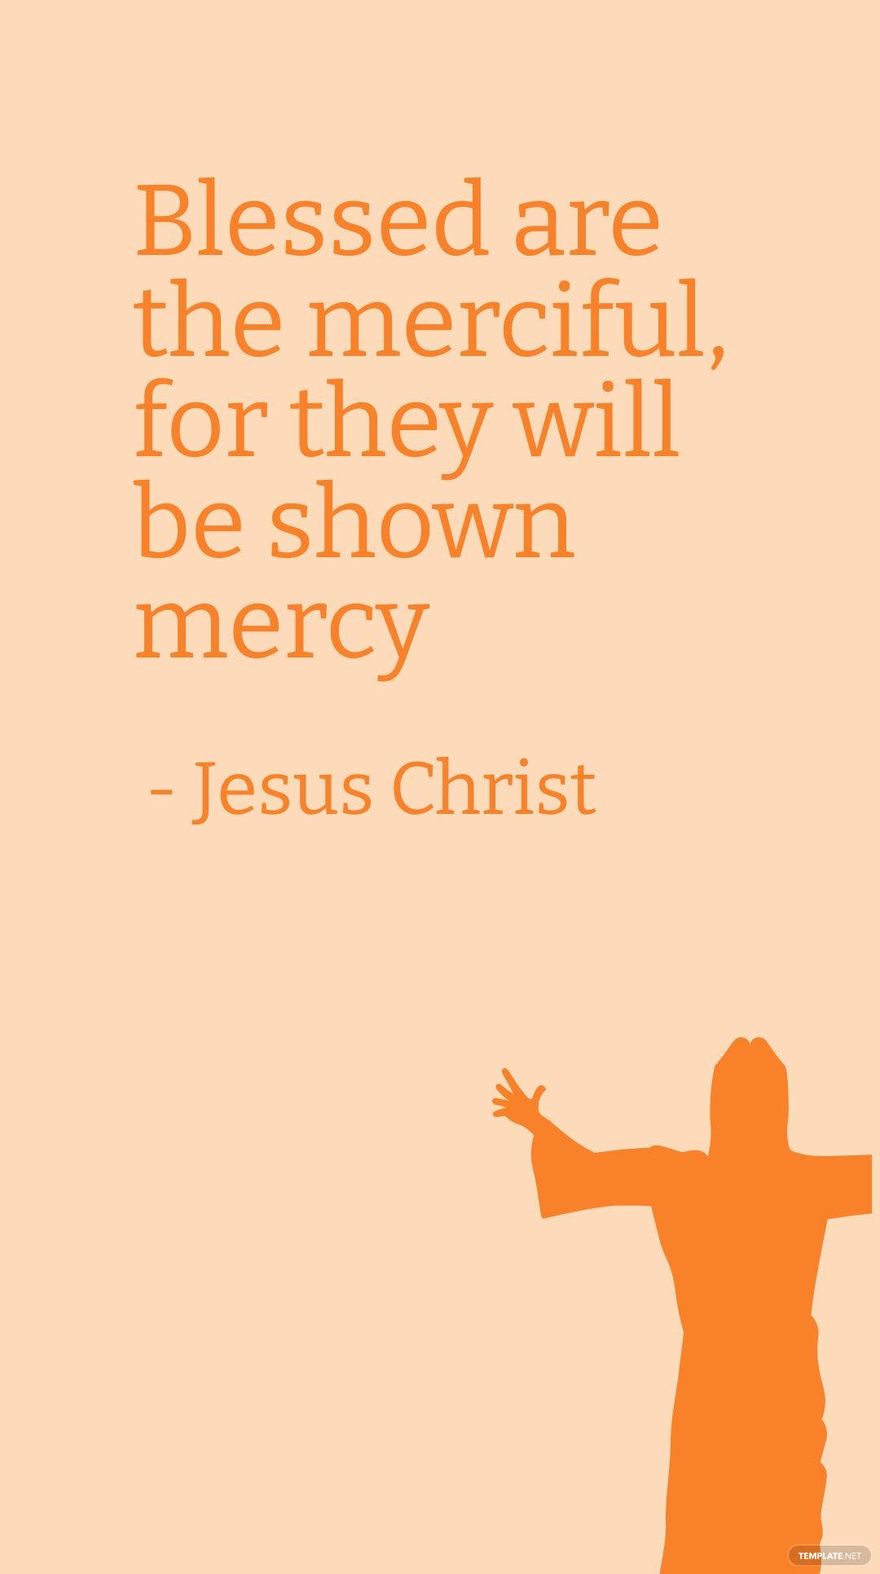 Jesus Christ - Blessed are the merciful, for they will be shown mercy